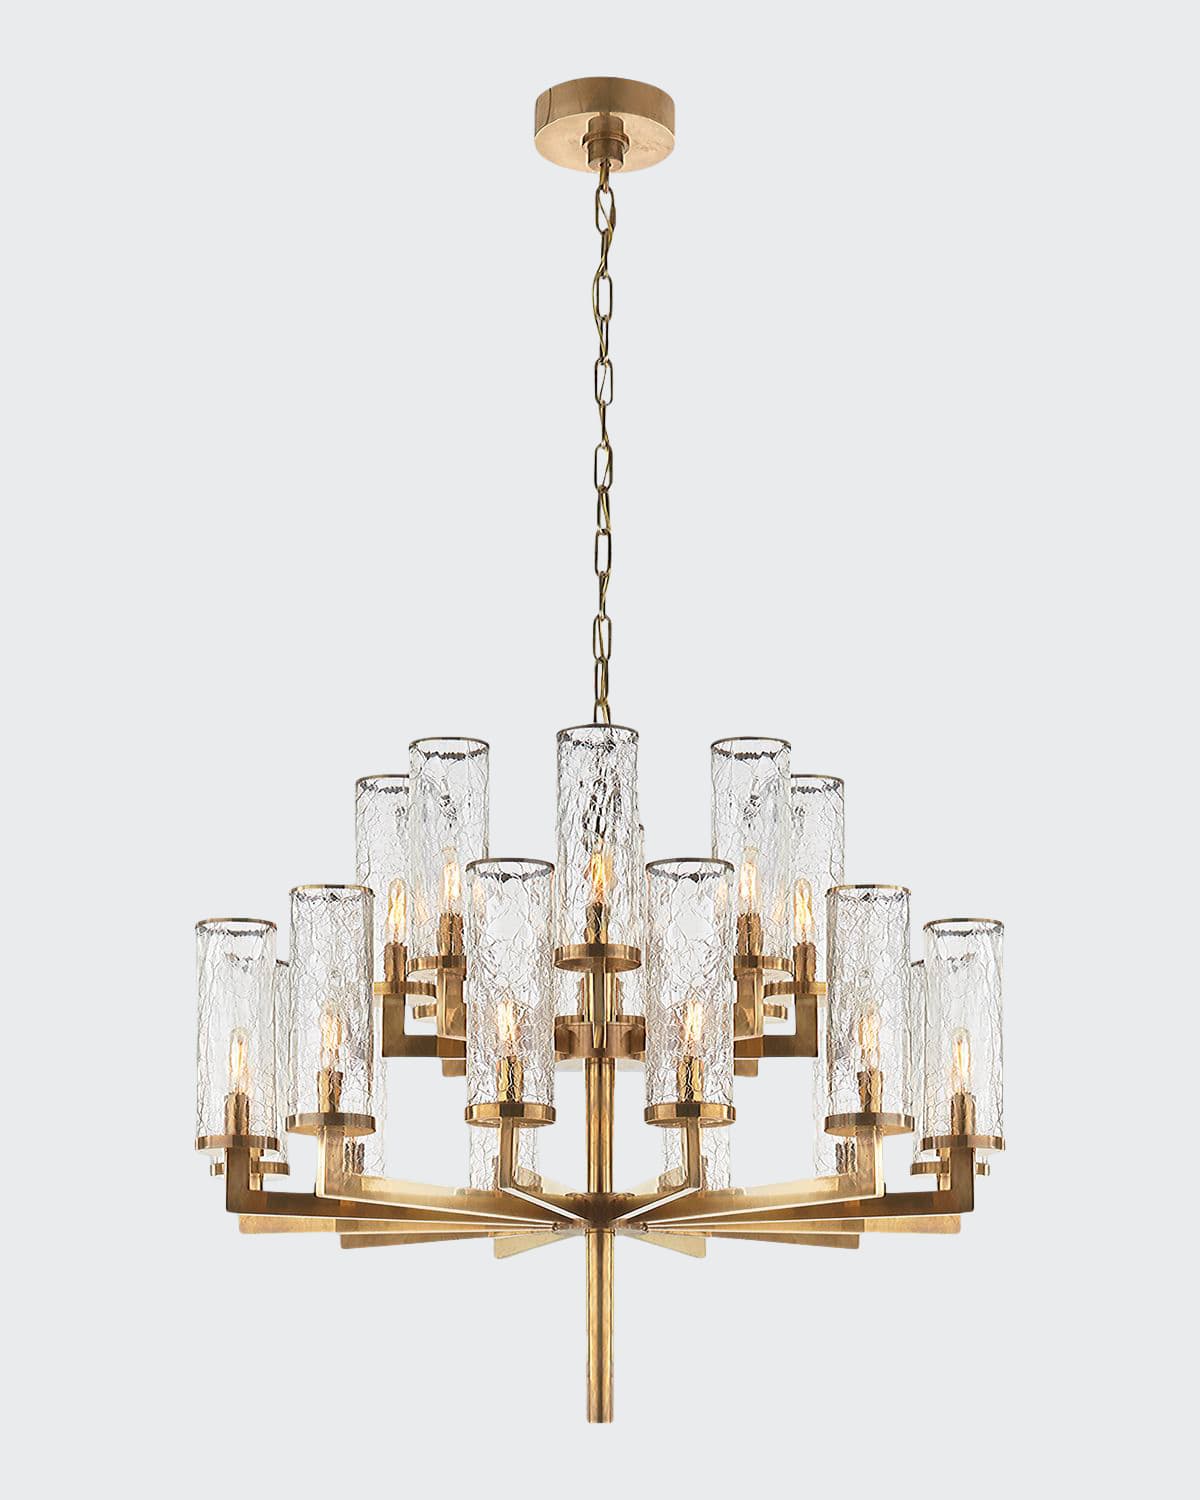 Kelly Wearstler For Visual Comfort Signature Liaison Single Tier Chandelier In Antique Brass